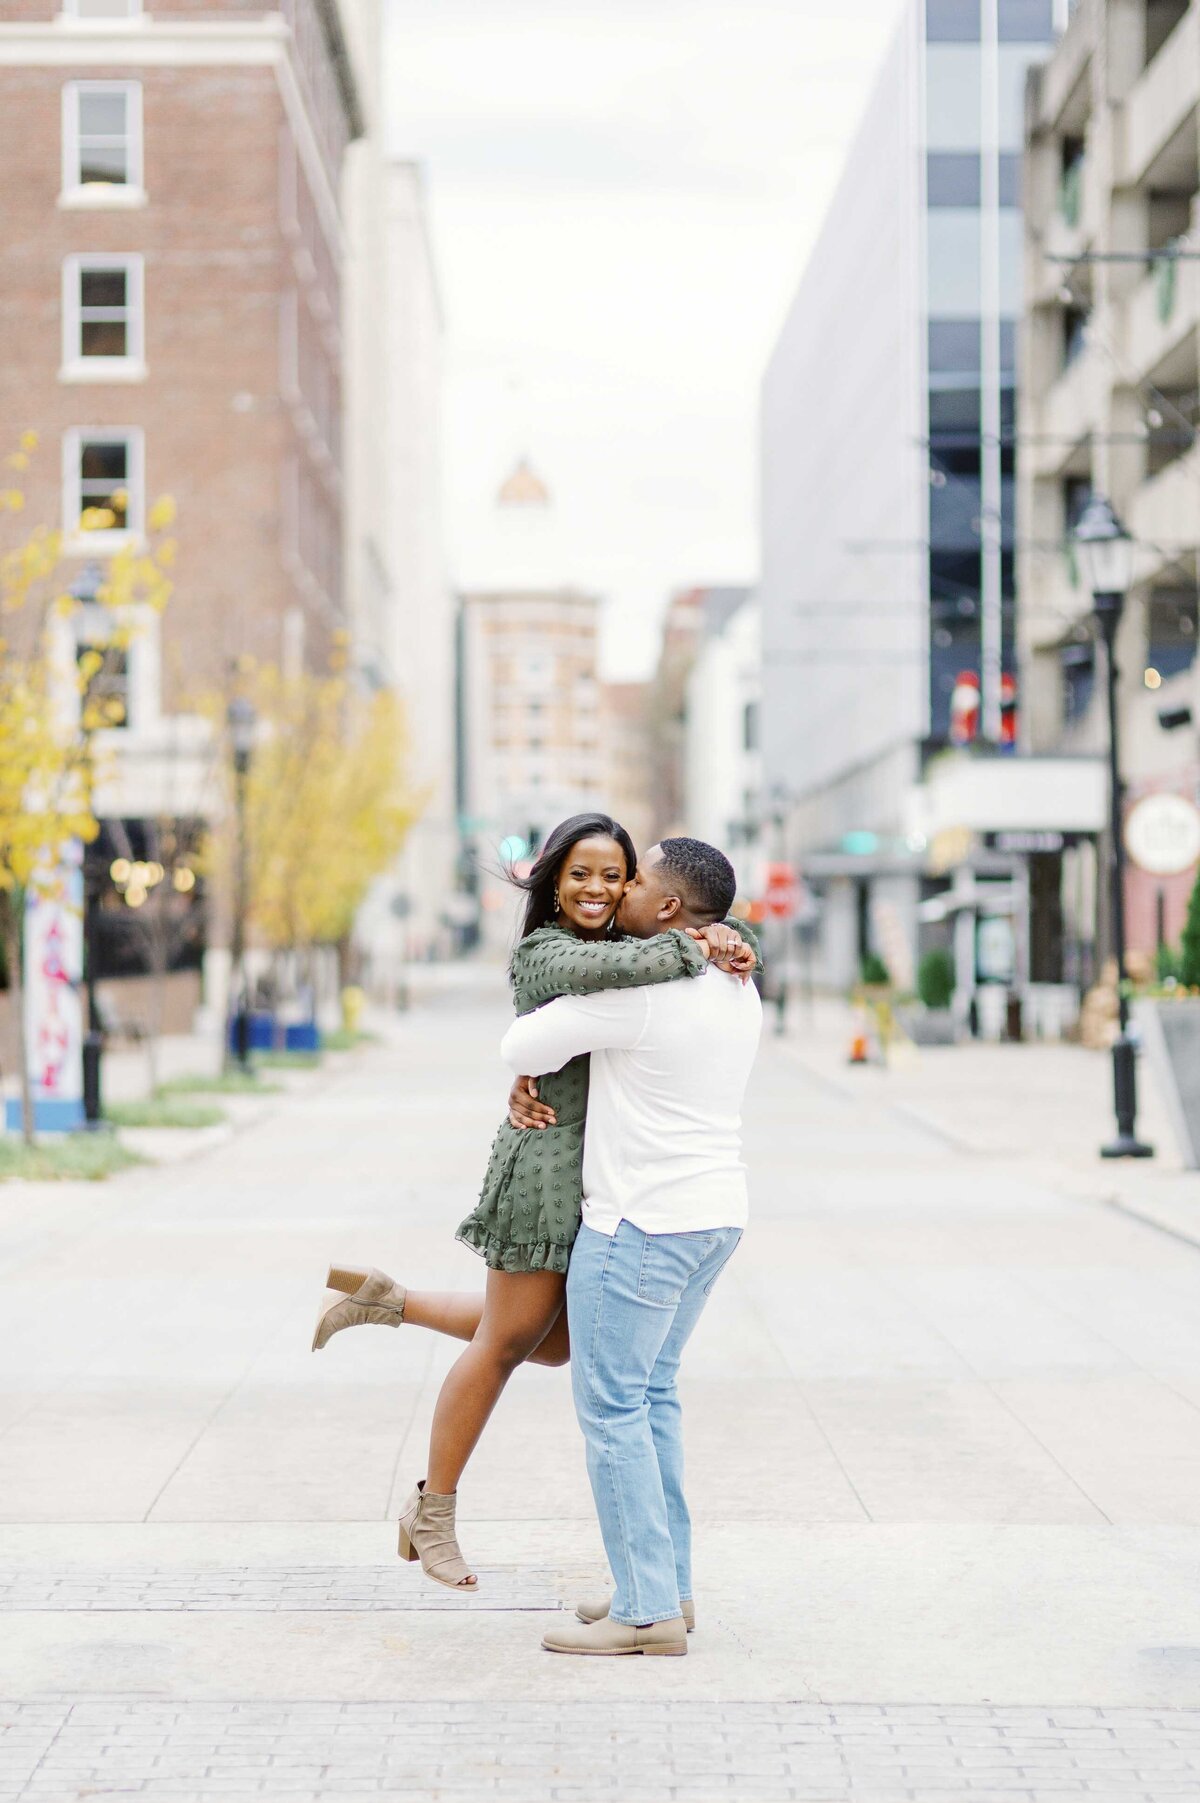 Alaina-Rene-Knoxville-Tennessee-Wedding-Engagement-Senior-Phtoography-Light-And-Airy_55